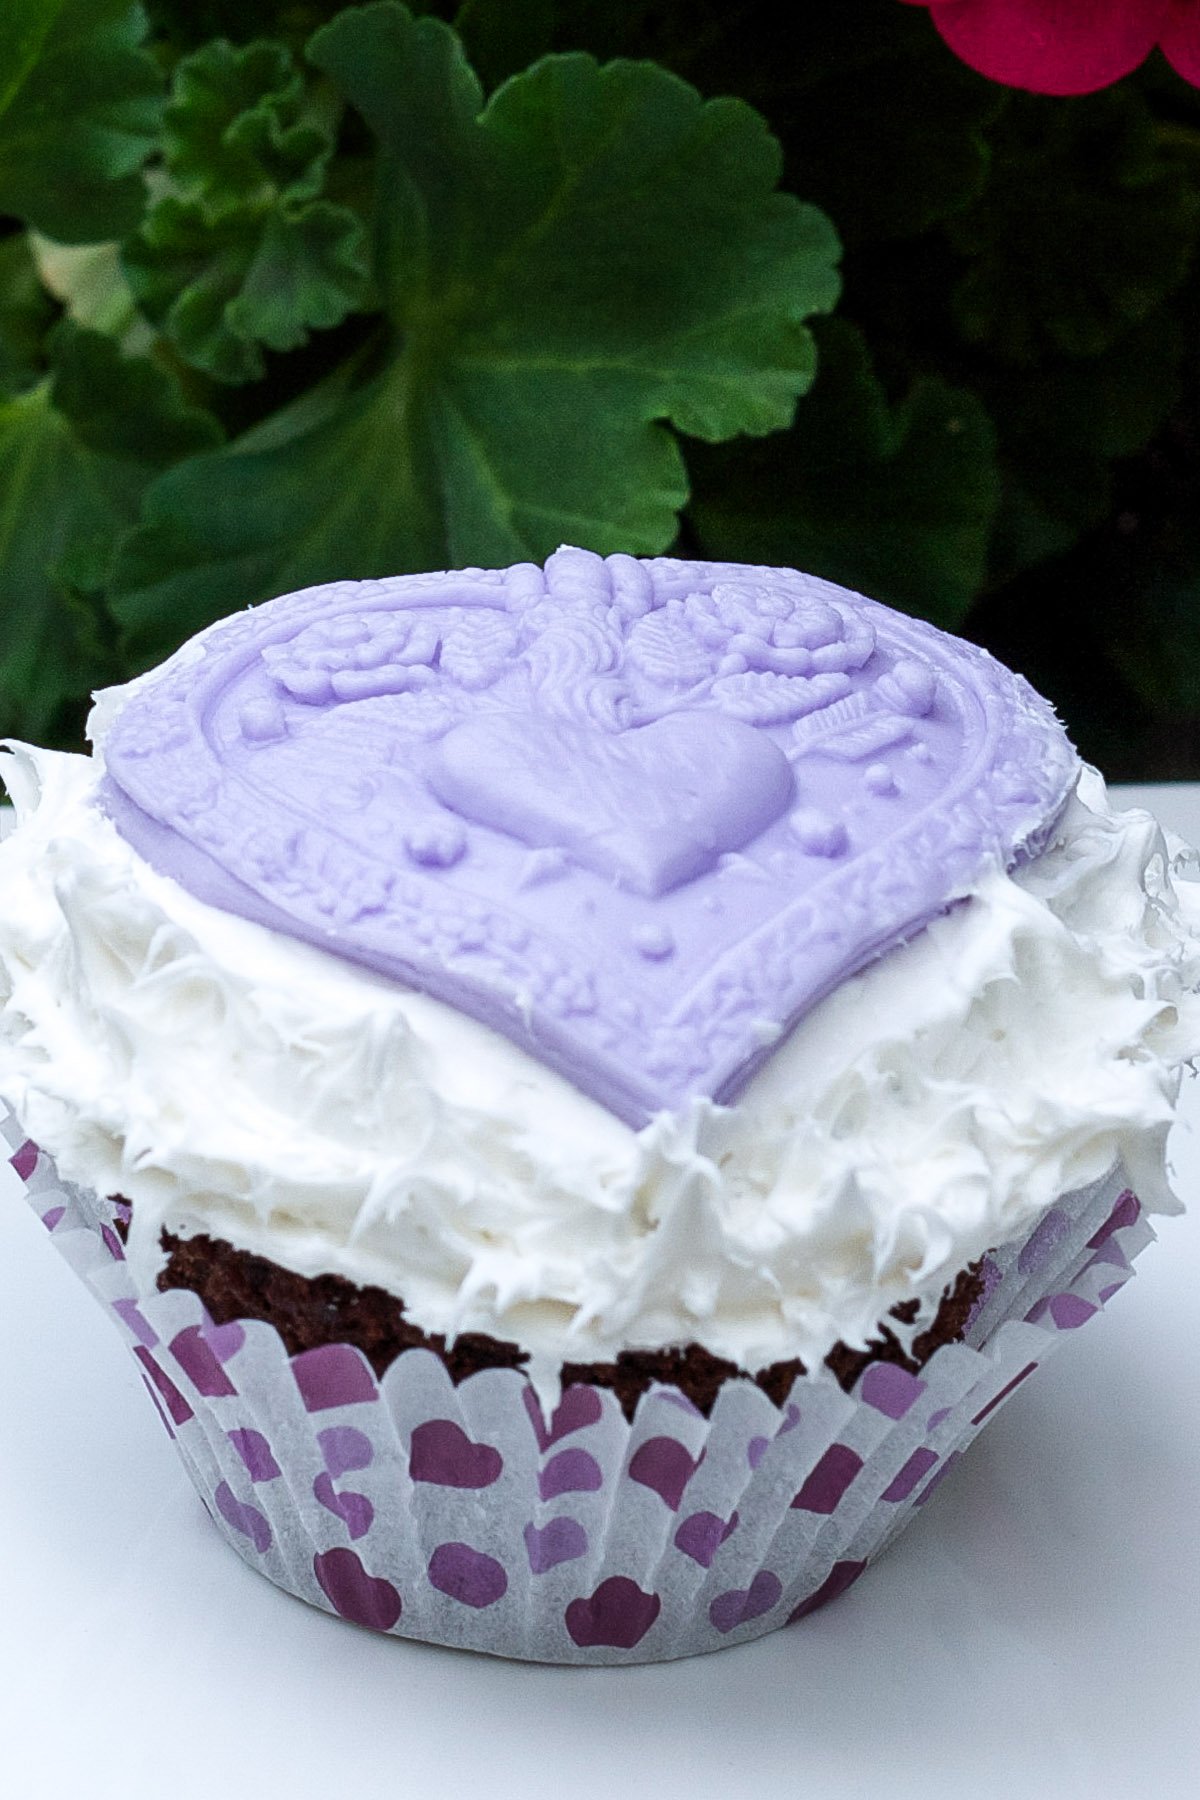 Chocolate cupcake with fluffy white icing top with purple fondant heart decoration.